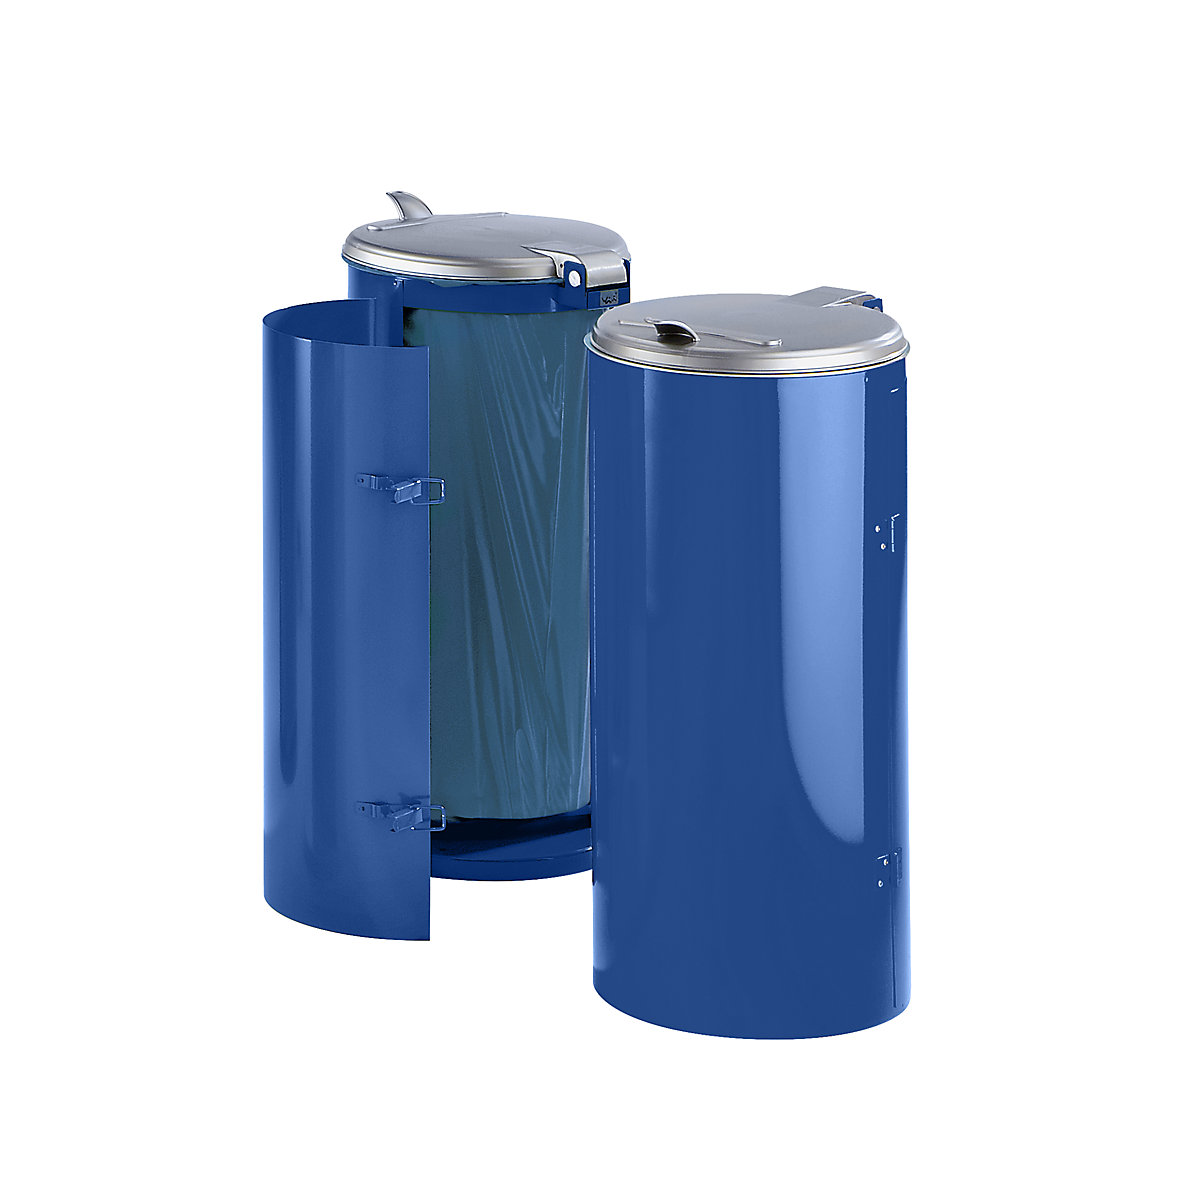 Sheet steel waste collector – VAR, for capacity 120 l, with single door, blue with silver coloured plastic lid-4